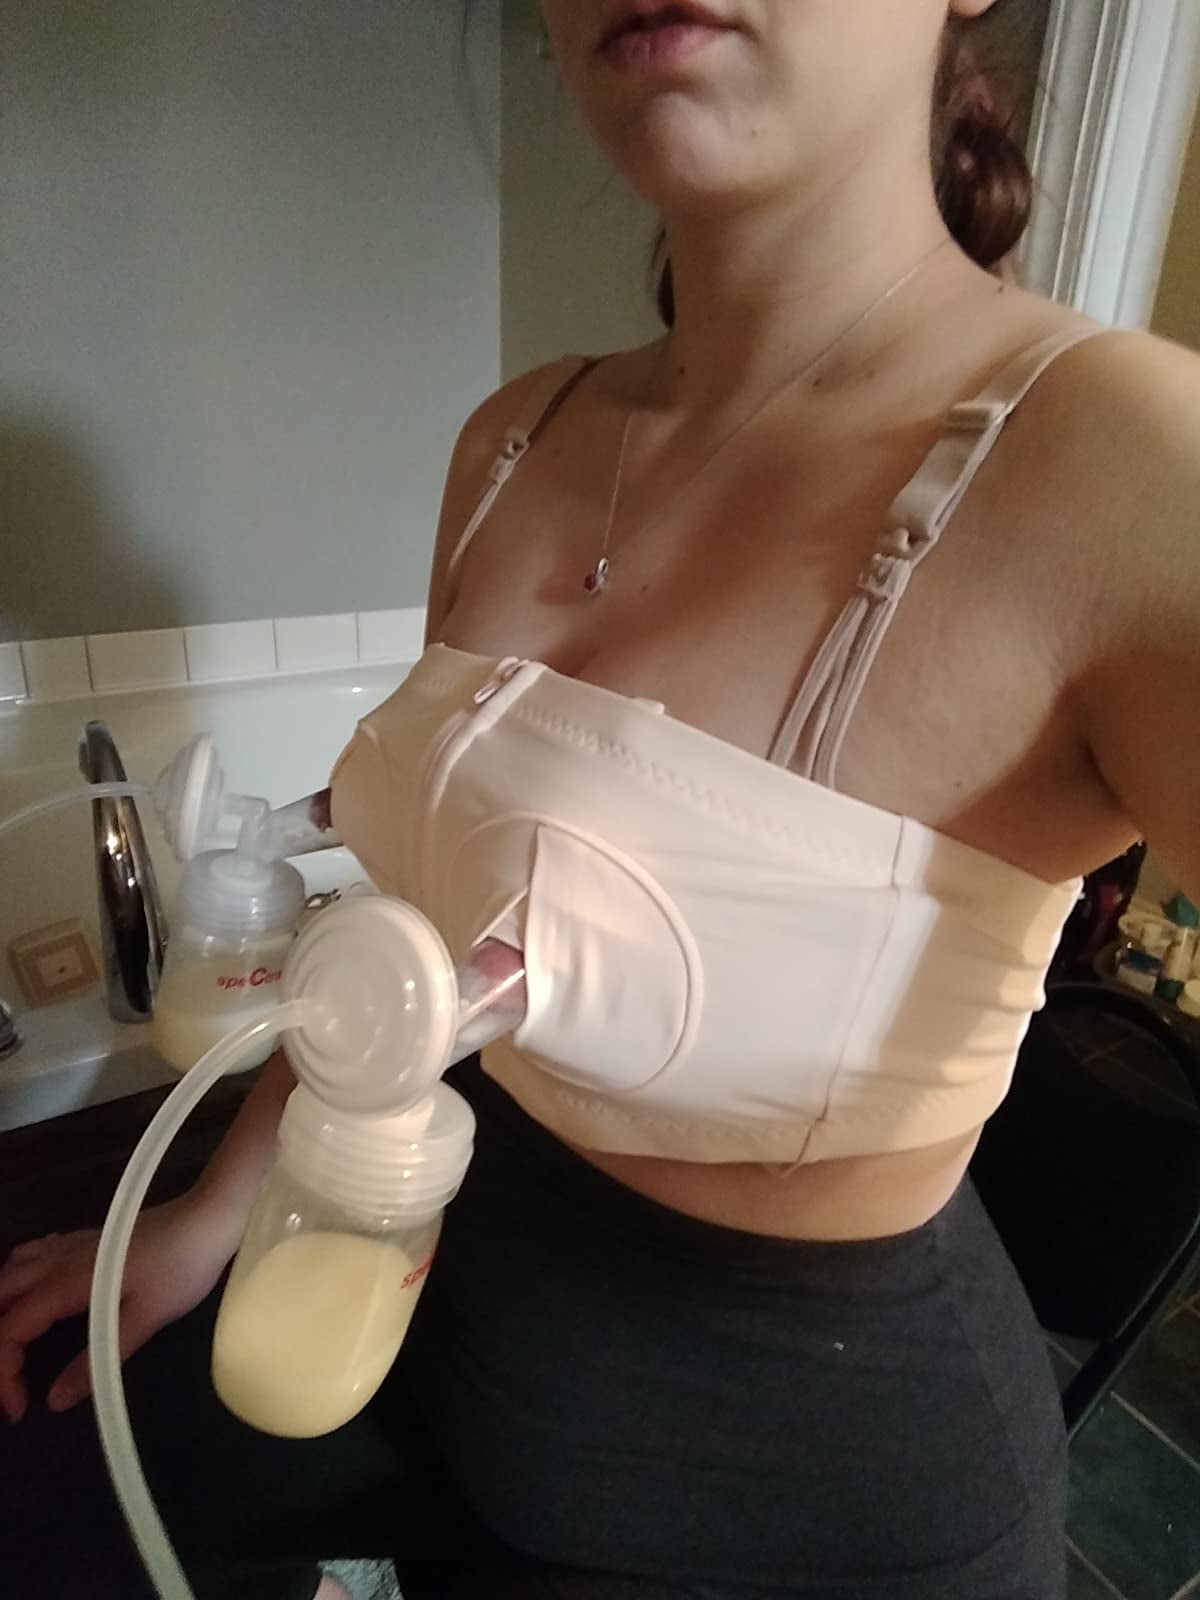 Florence is the holy grail of nursing bras! Having 34H boobs, I had almost  given up hope of finding a nursing bra that fitted well and was  supportive